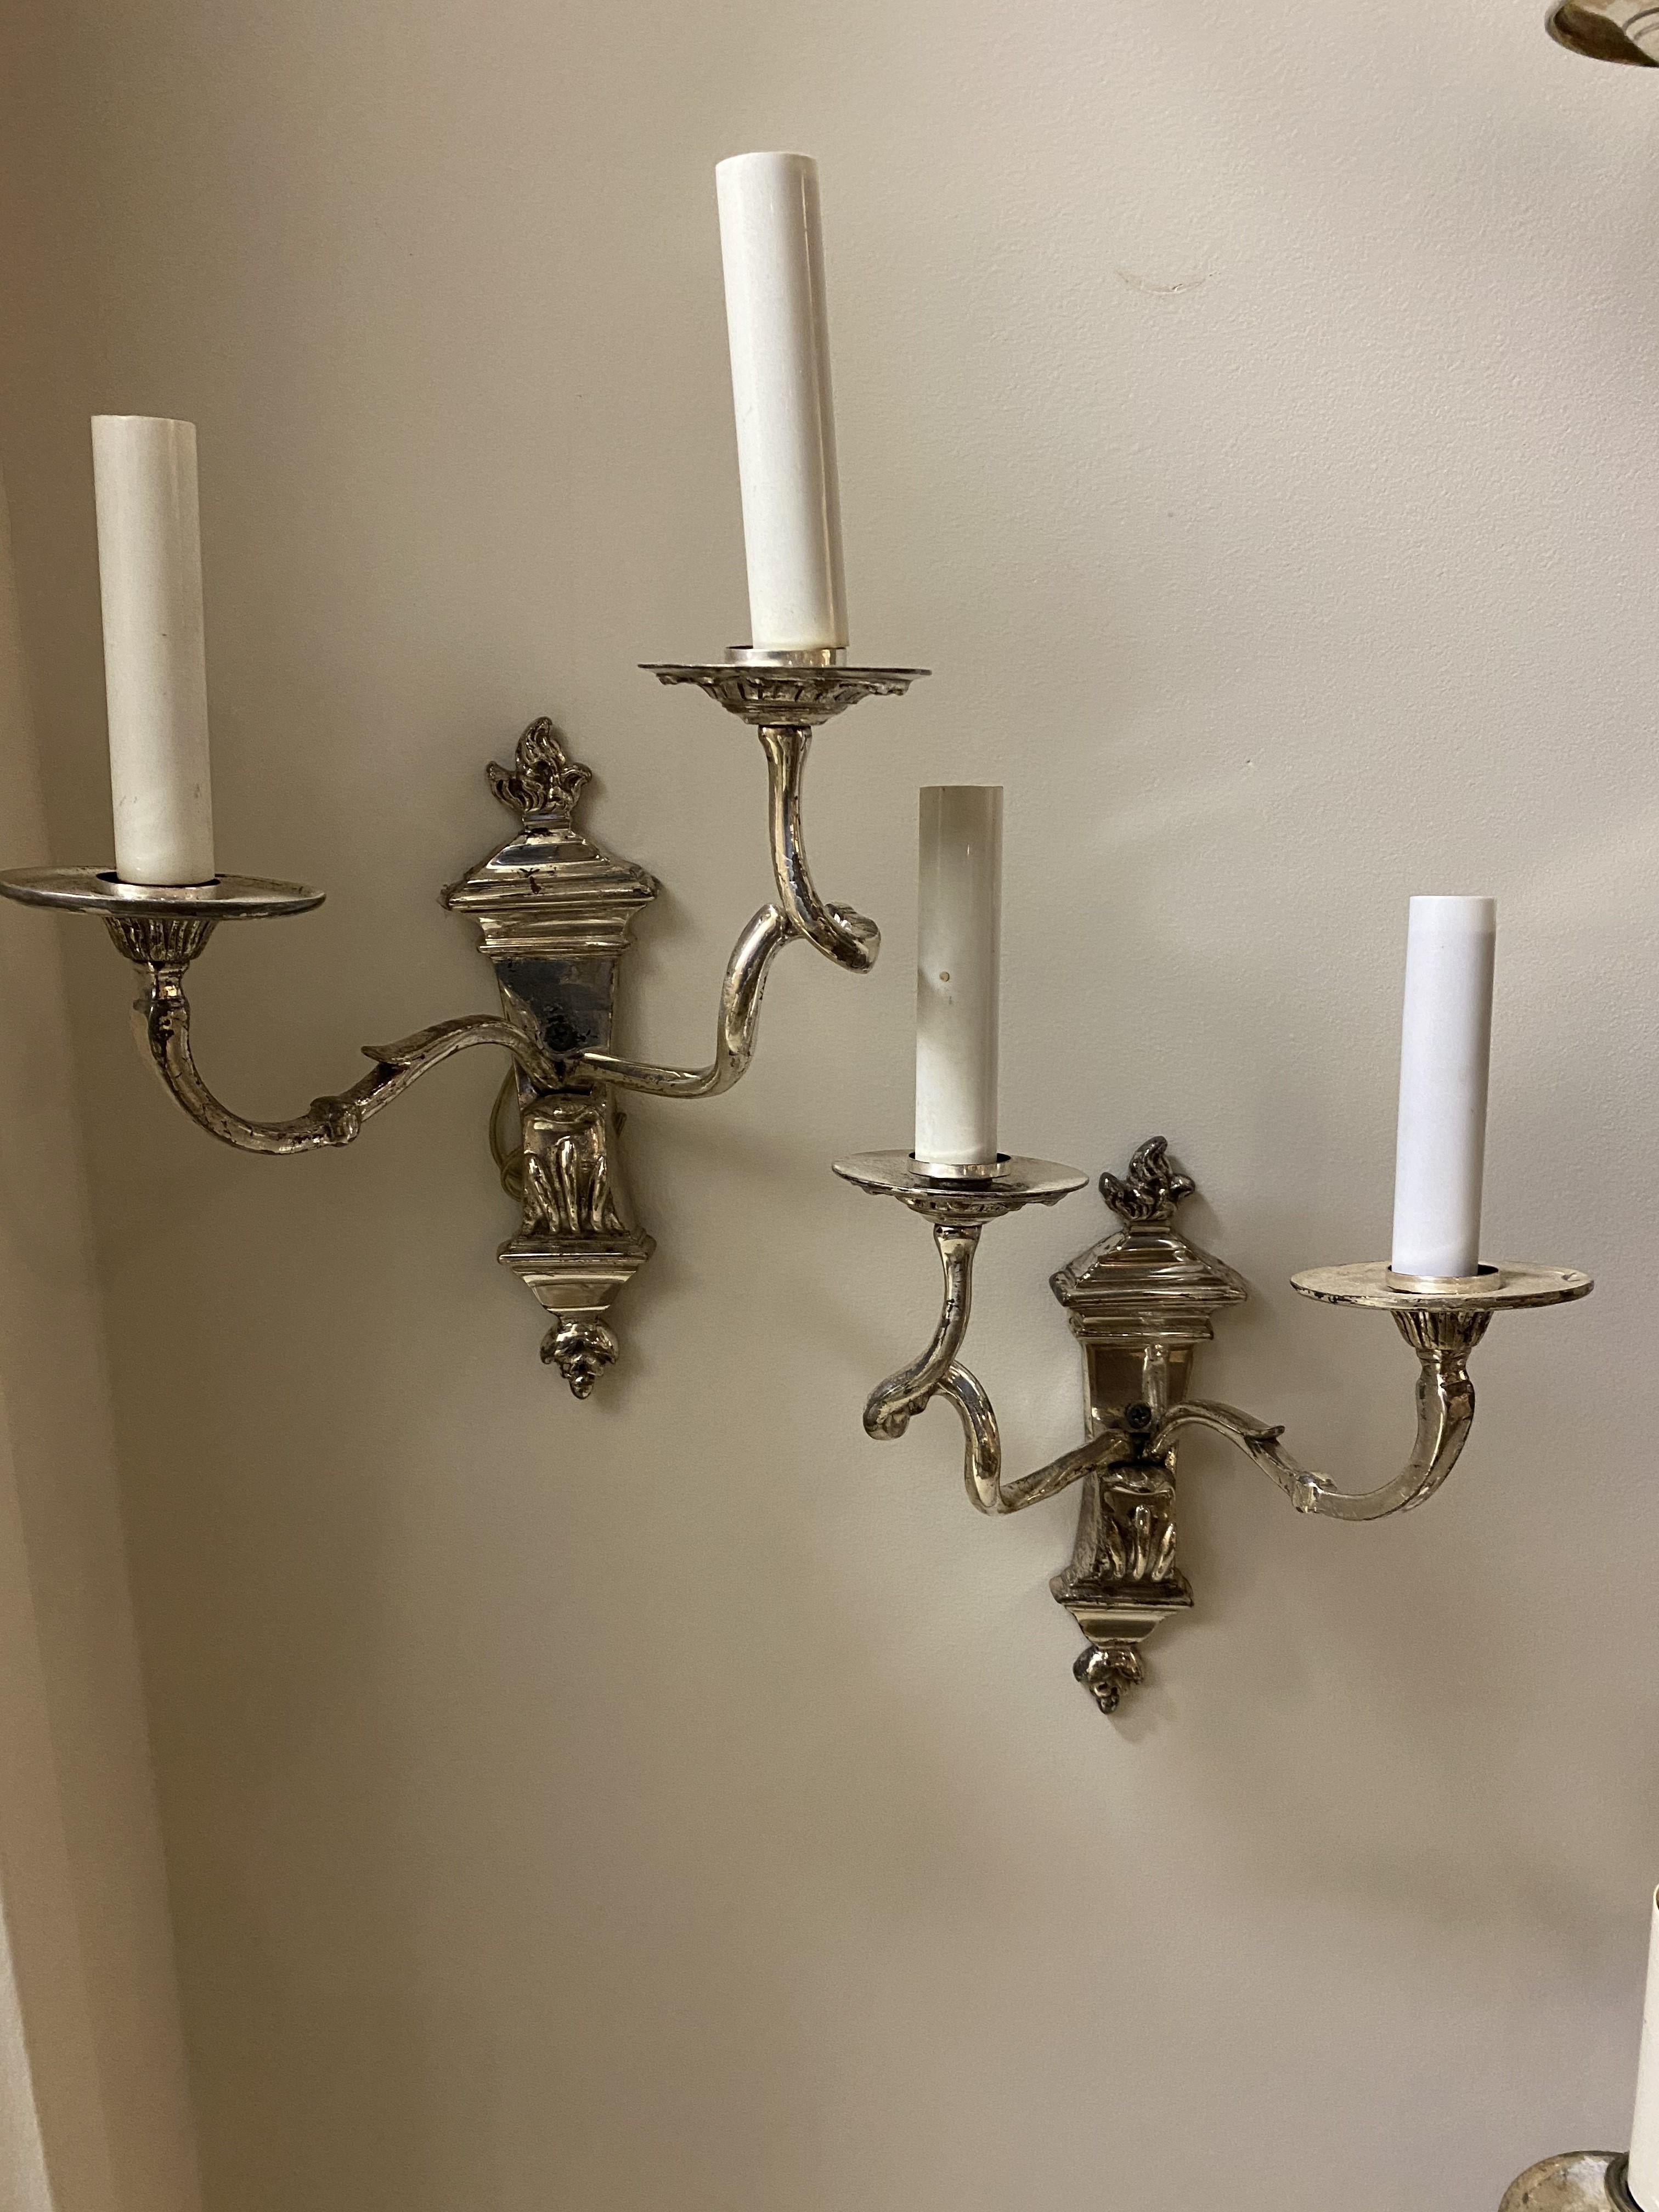 A pair of silver-plated Caldwell double light sconces with scrolled arms.